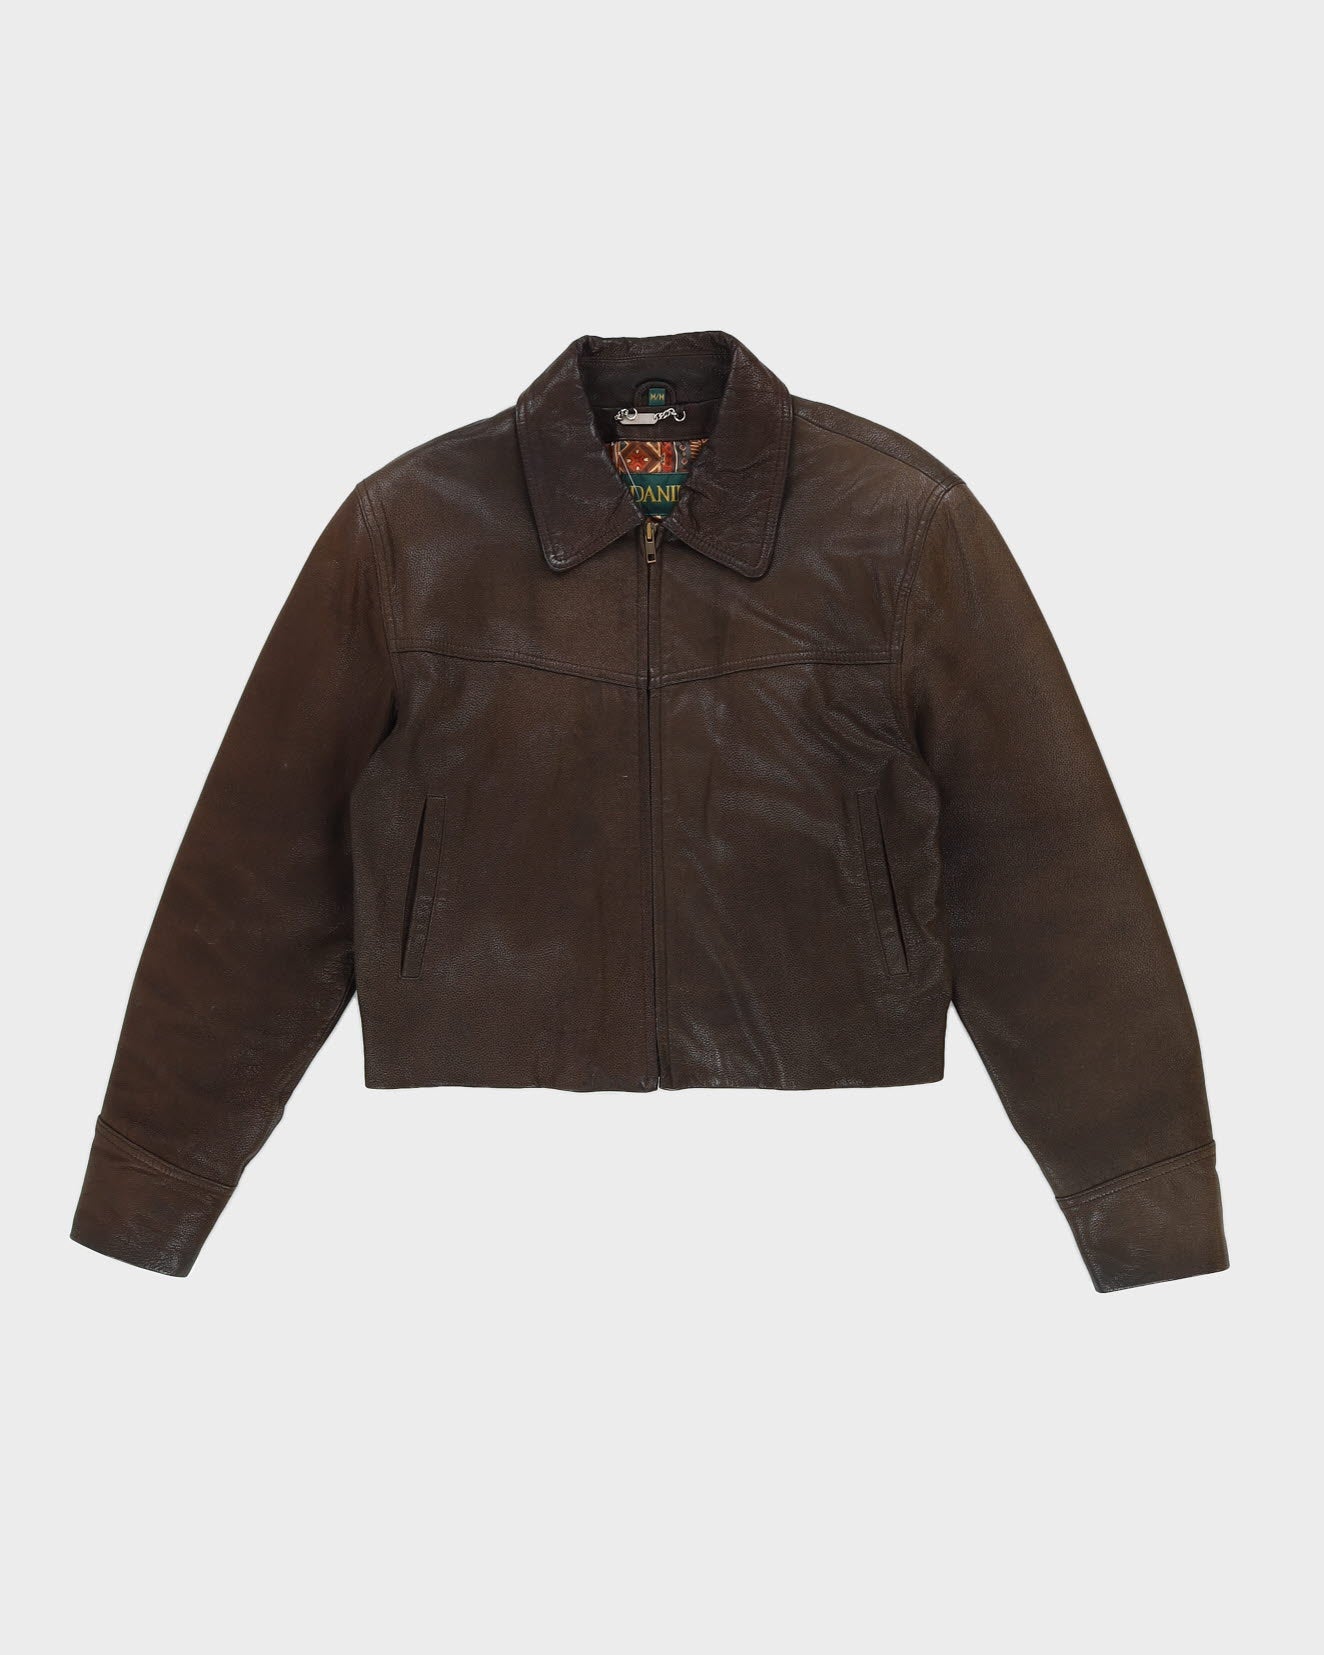 Danier Brown Leather Cropped Jacket - M